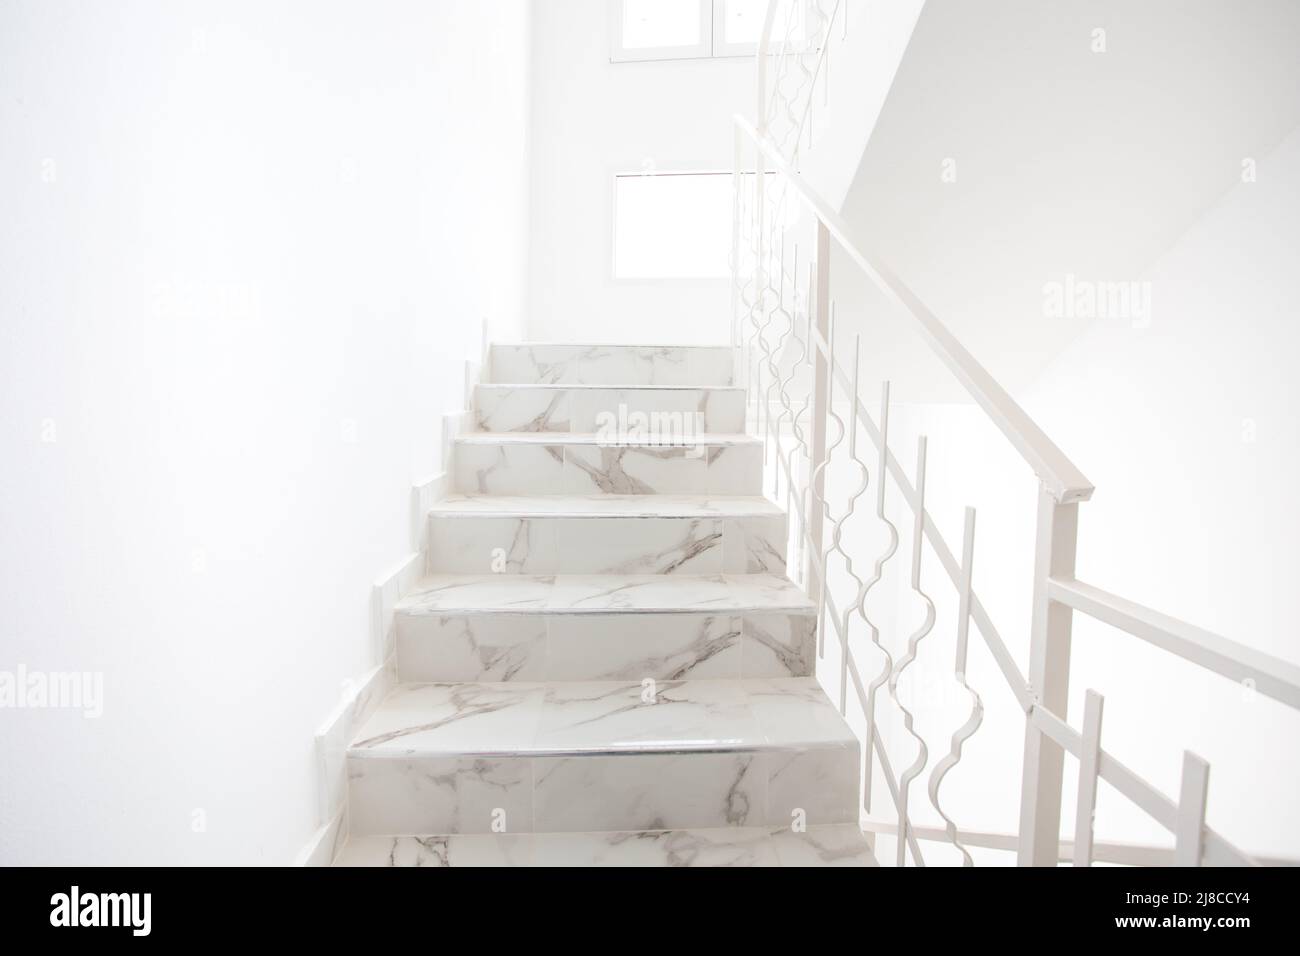 A bright, modern staircase. Stairs go up where you can see windows and light. White metal handrail on the side. Stock Photo